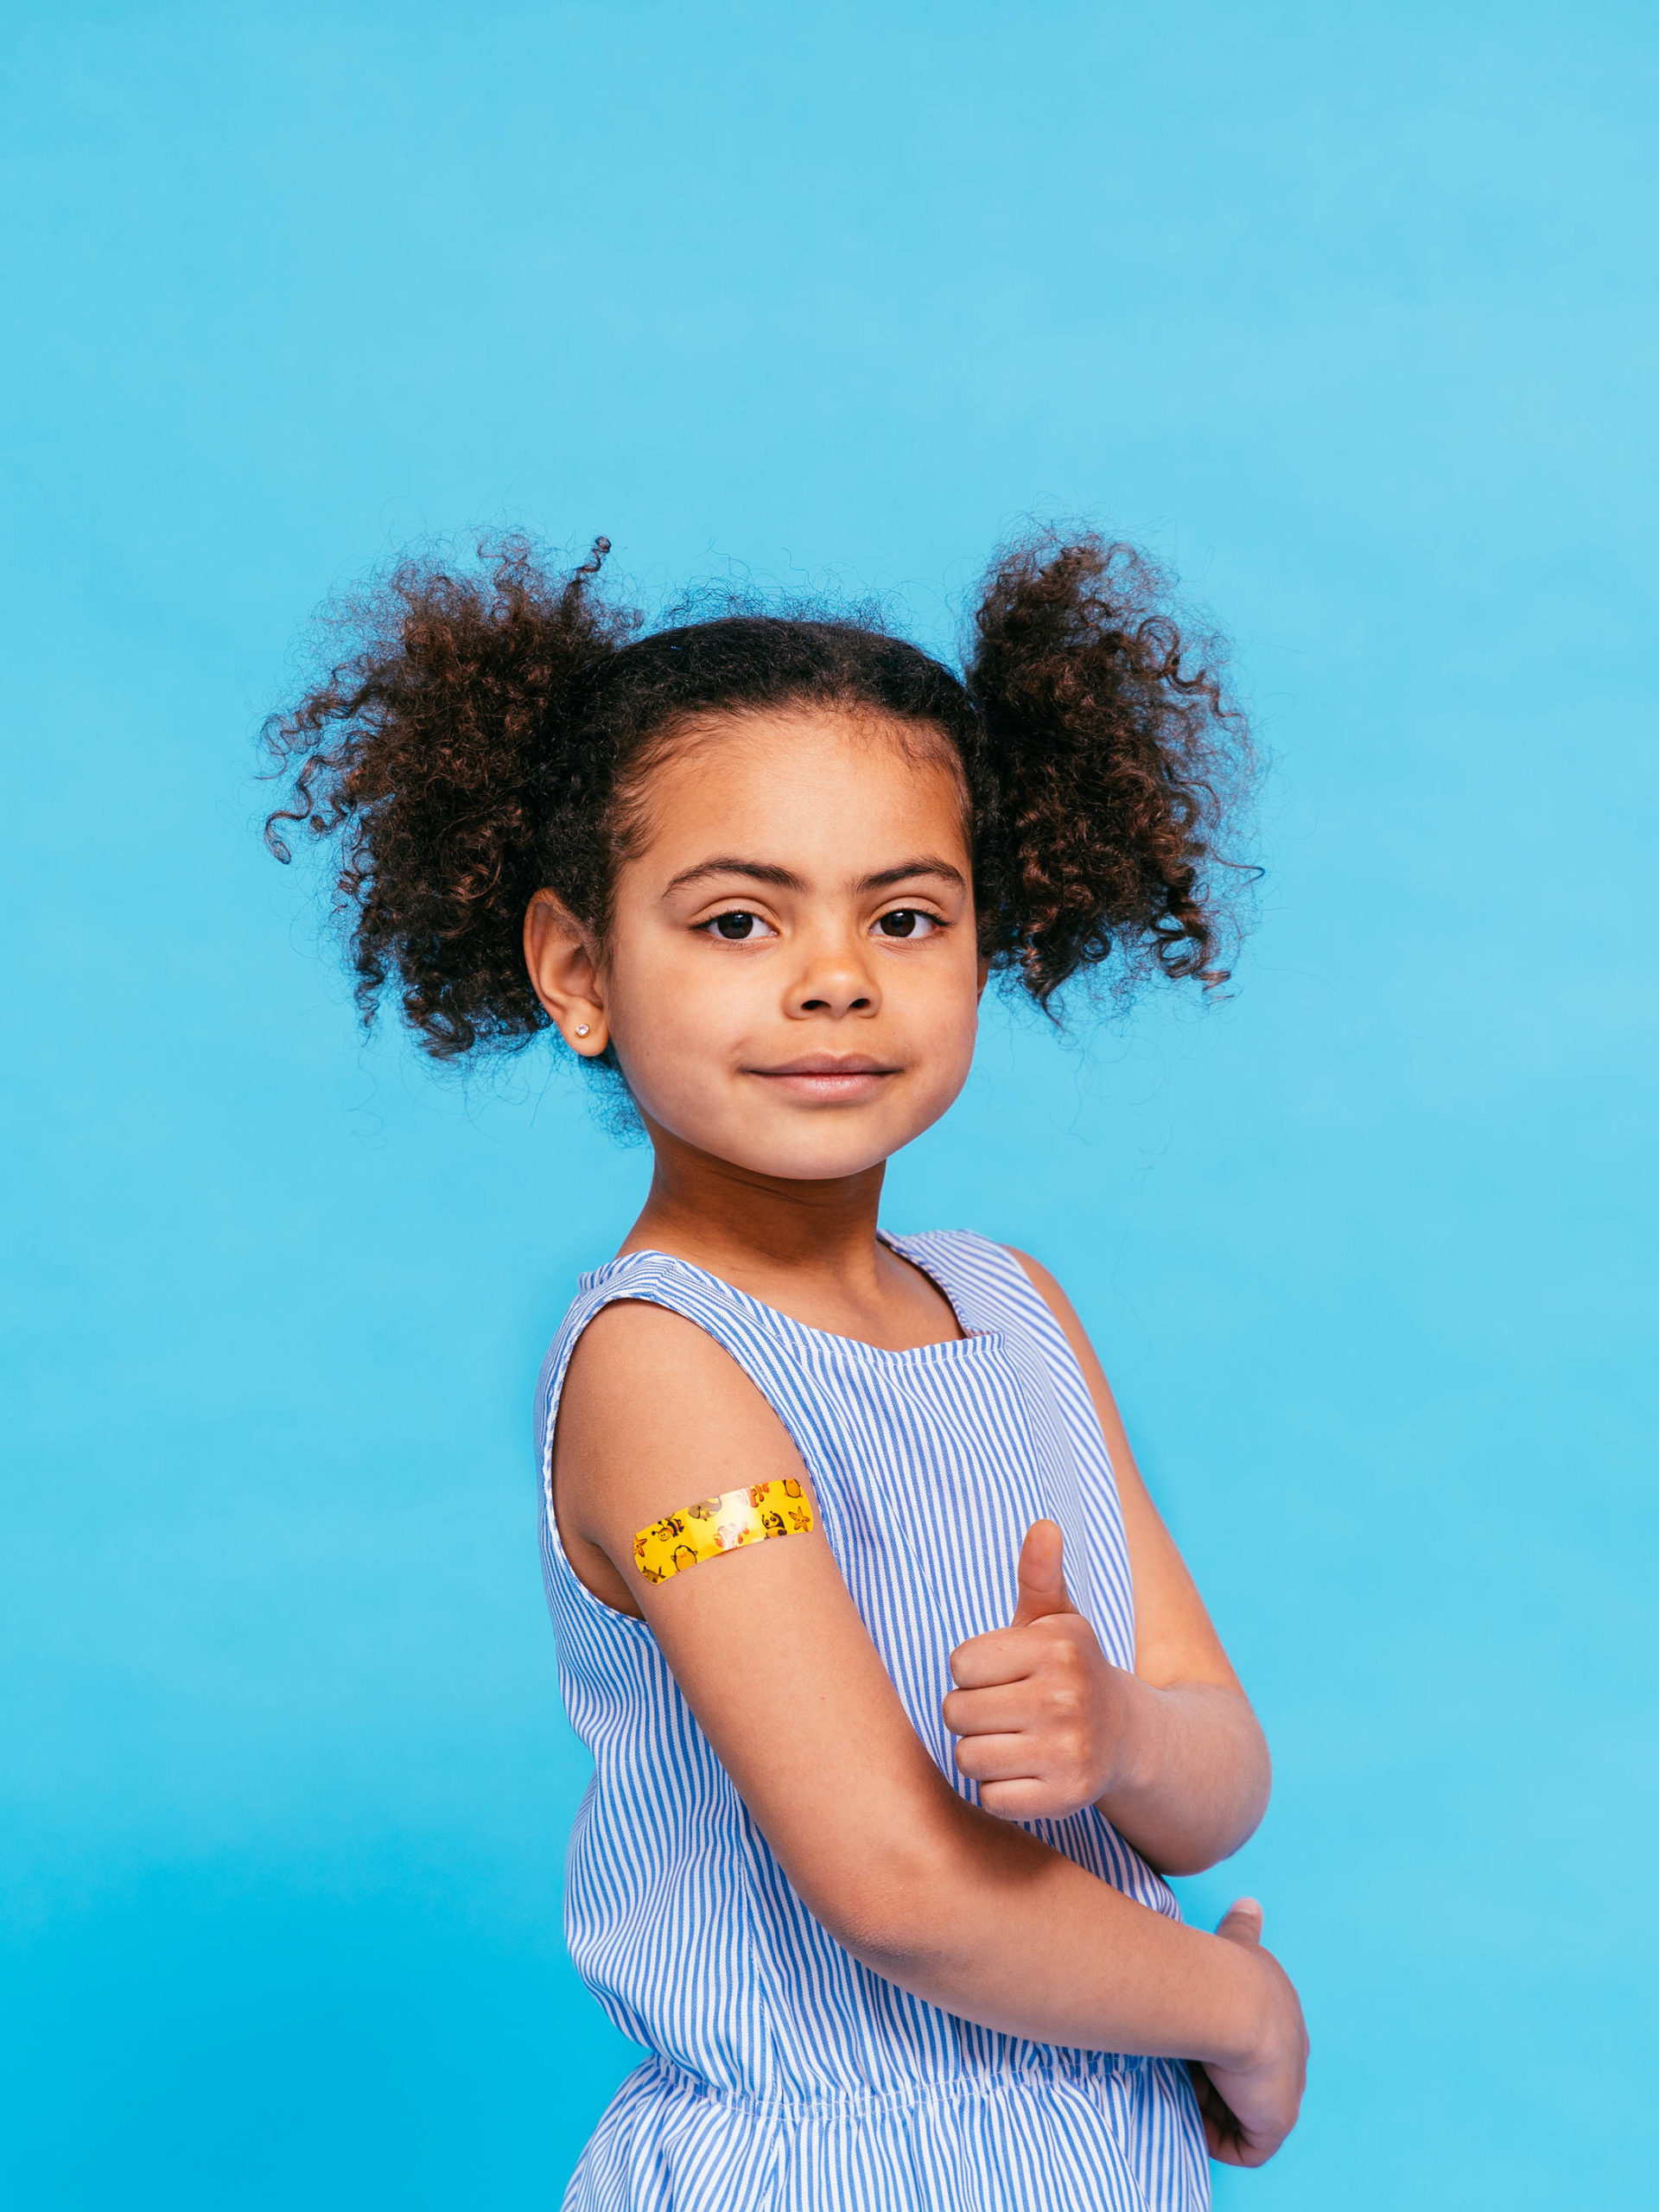 little girl who has just received vaccine giving a thumbs up